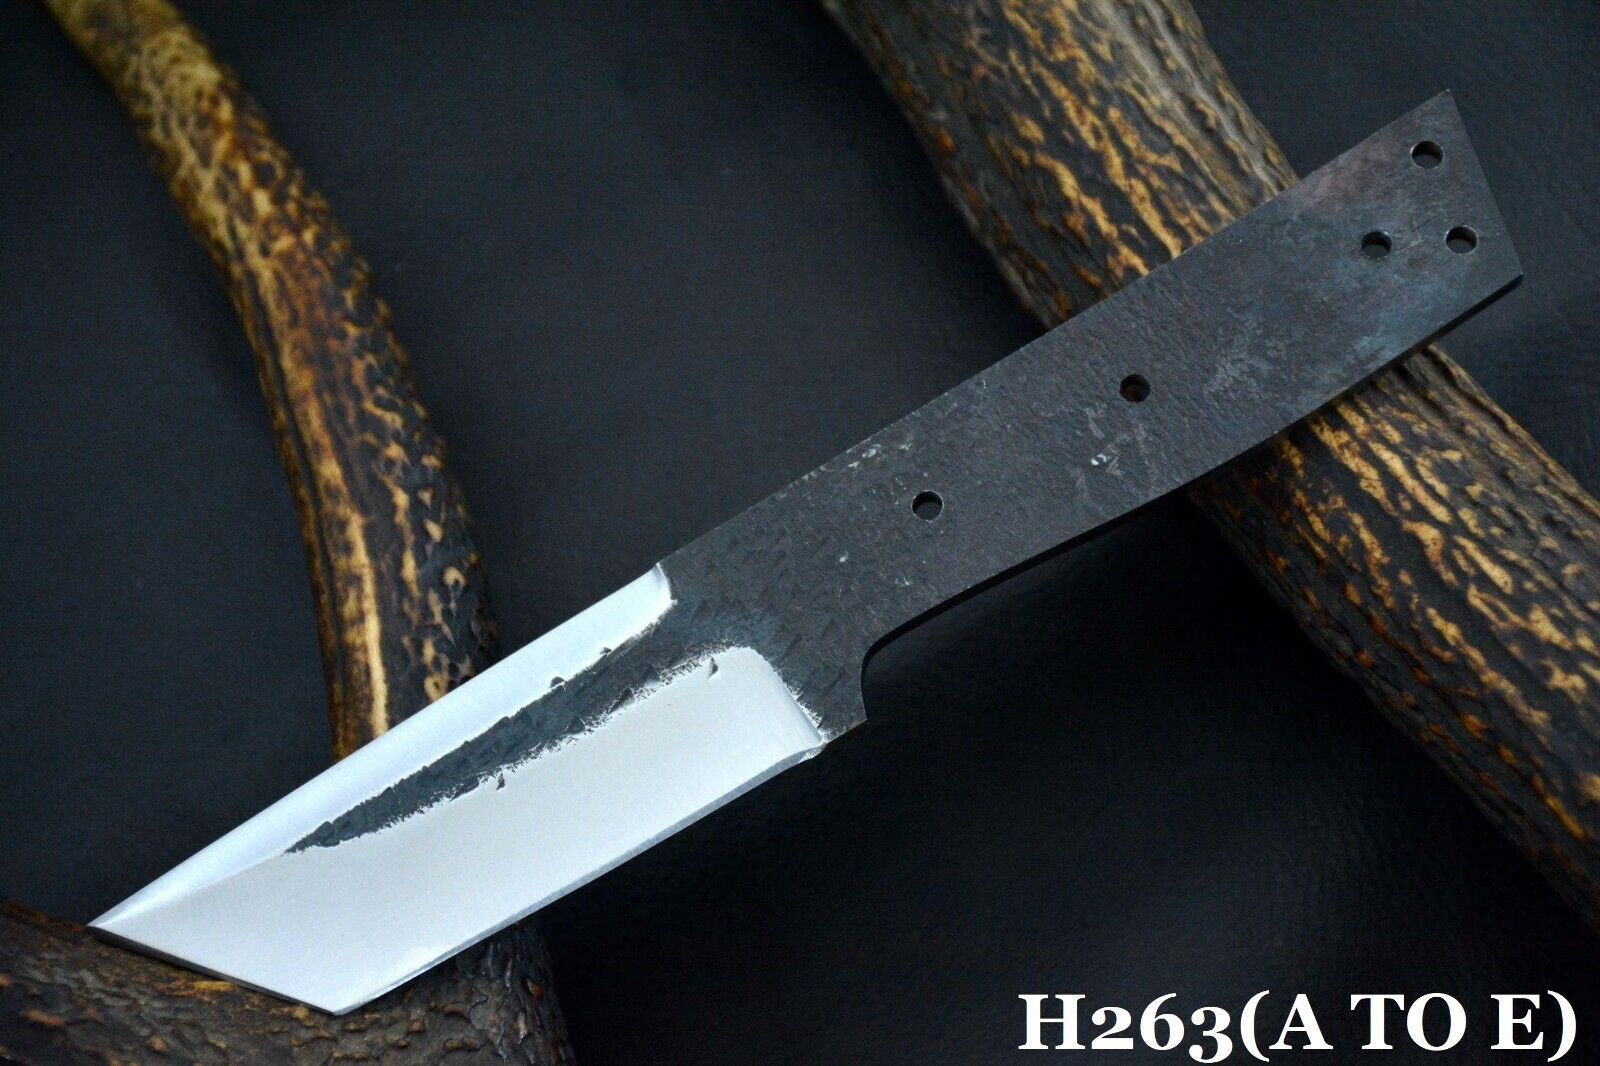 Custom Hammered 1095 High Carbon Steel Blank Tanto Hunting Knife,No Damascus (C)